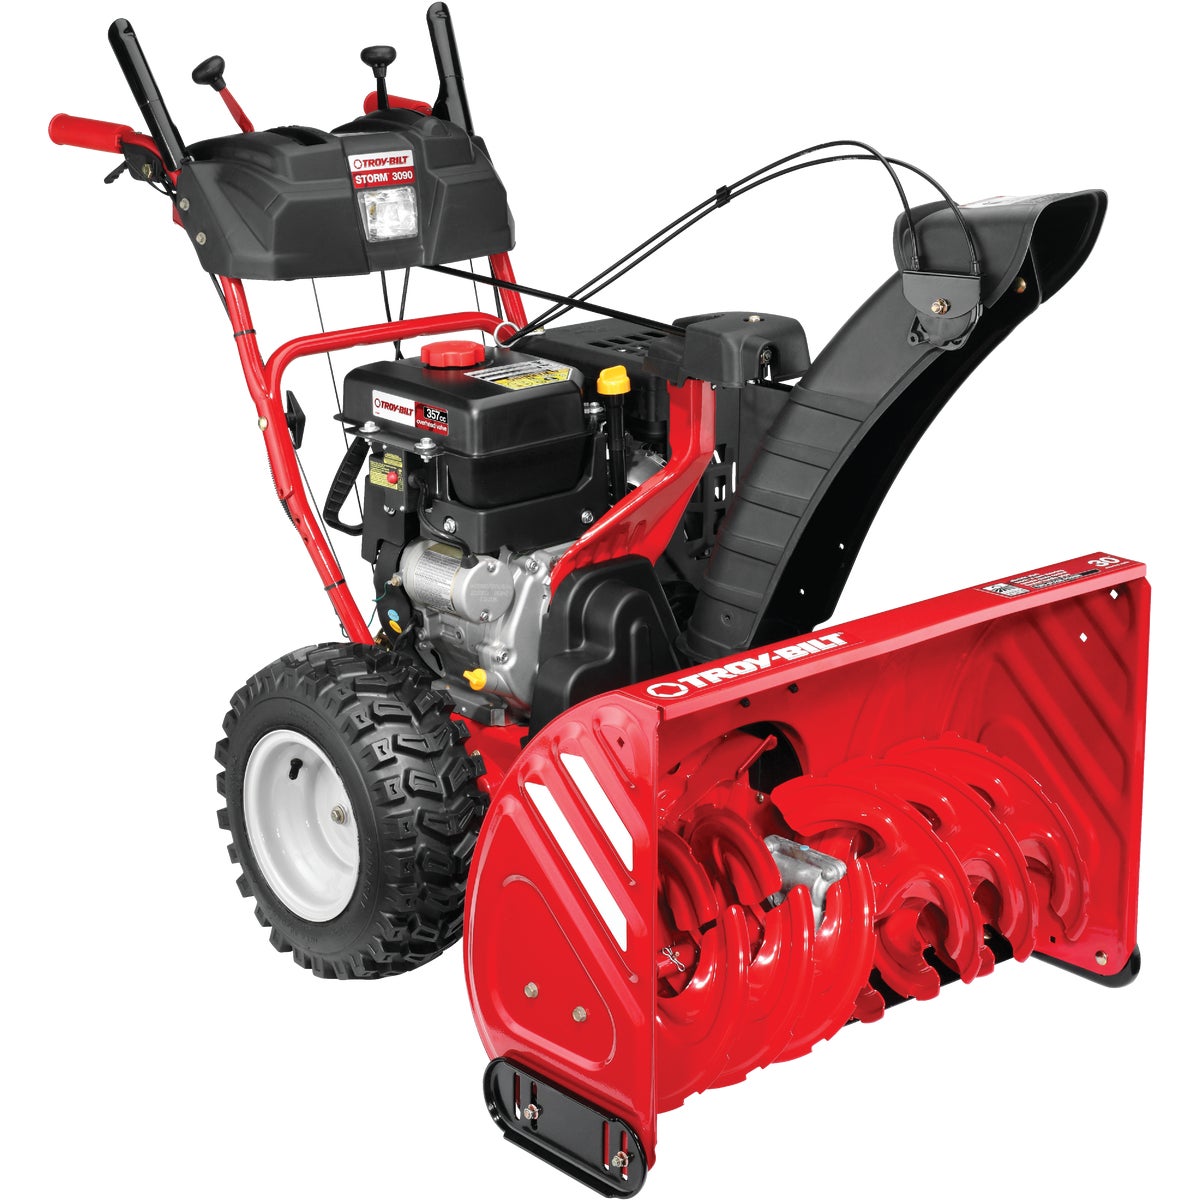 Item 724715, Features a 357 cc, OHV 4-cycle Troy-Bilt engine with electric start.